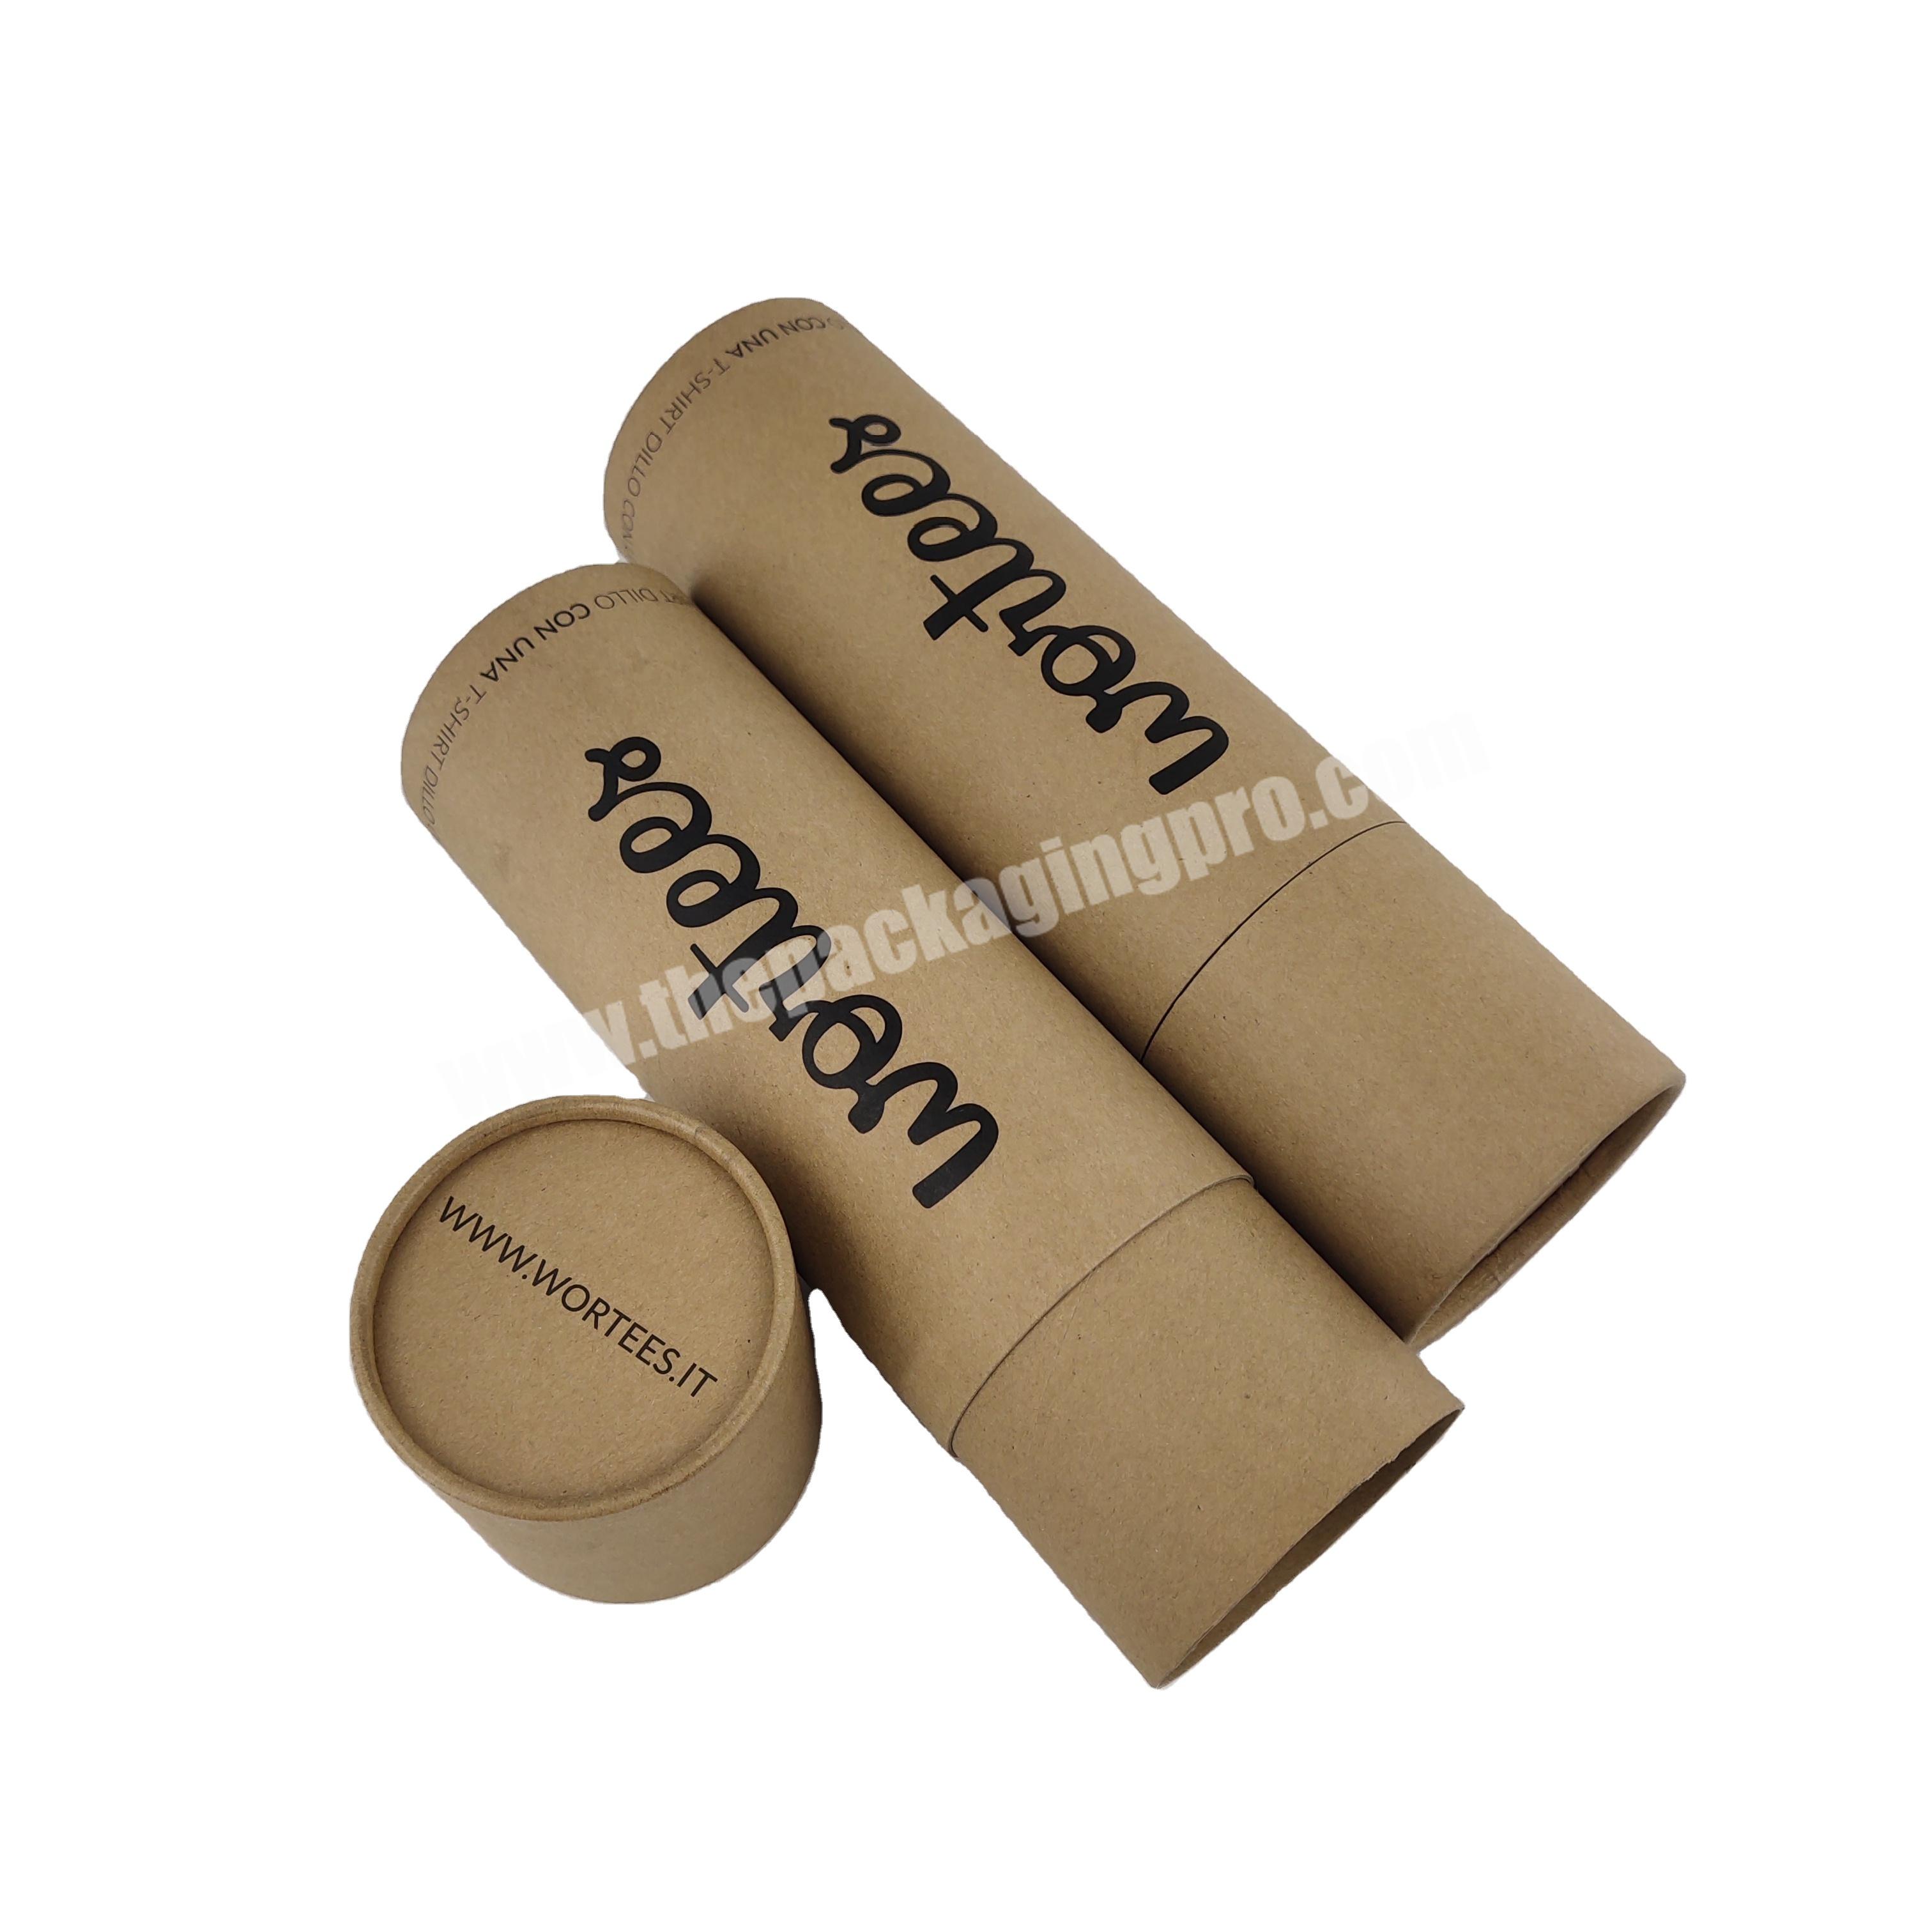 Customized Tshirt Packaging Box Cylinder Packaging Box Rigid Boxes Kraft Paper